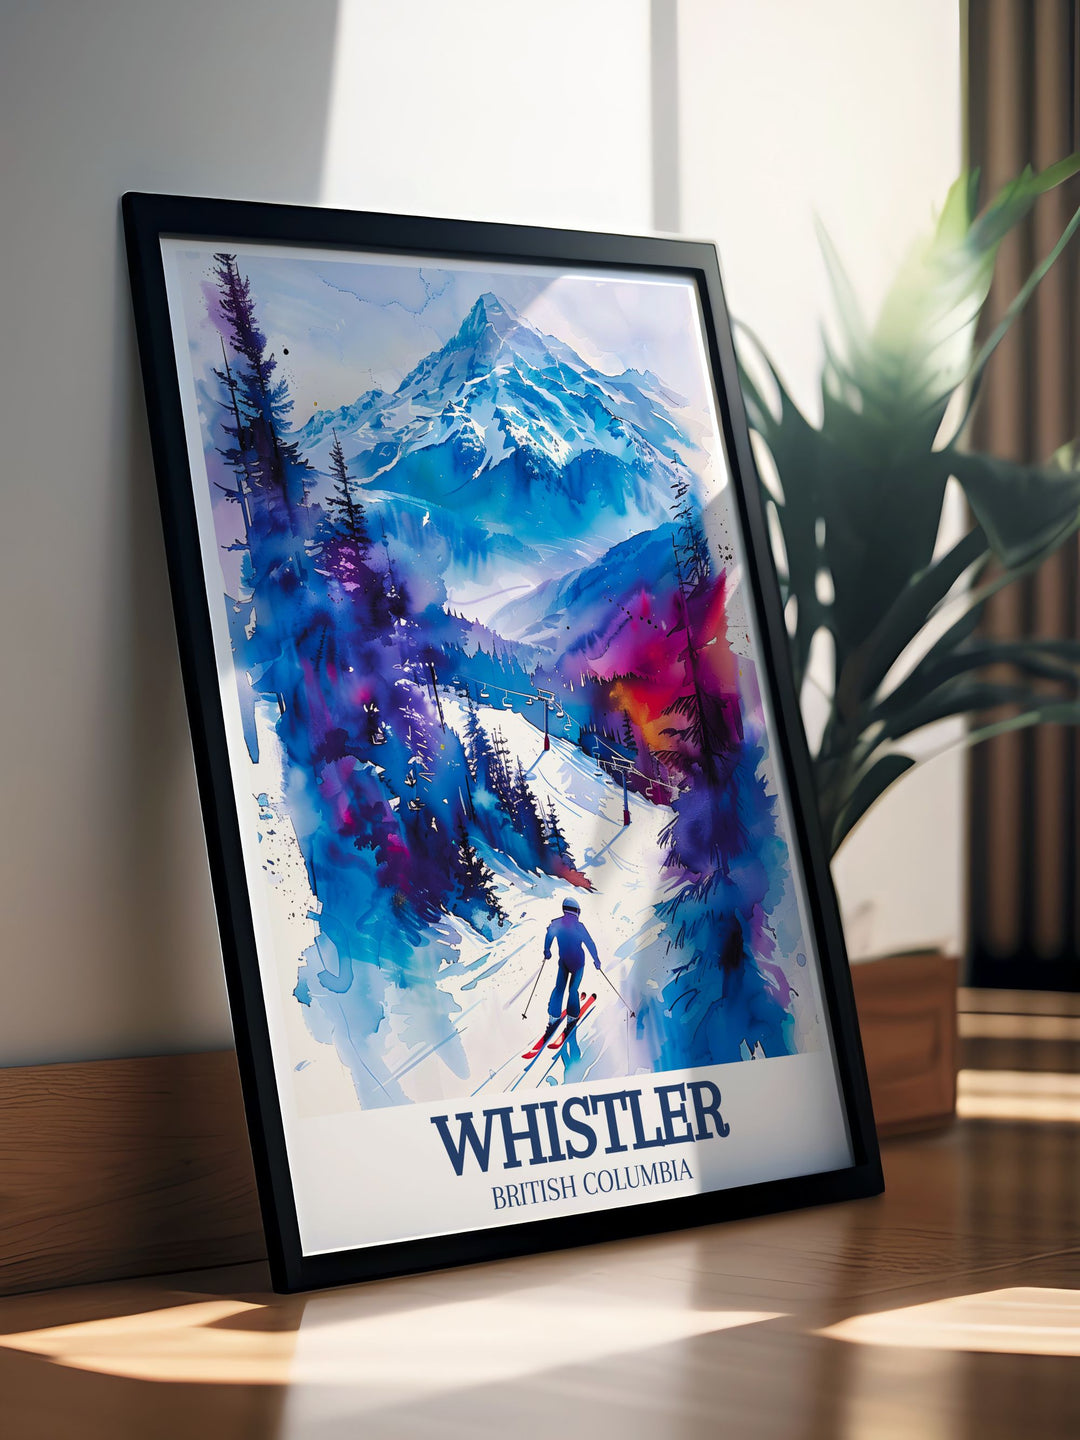 Whistler poster showcasing the world class skiing destination nestled in the Coast Mountains designed to inspire and captivate bringing the beauty of the outdoors indoors